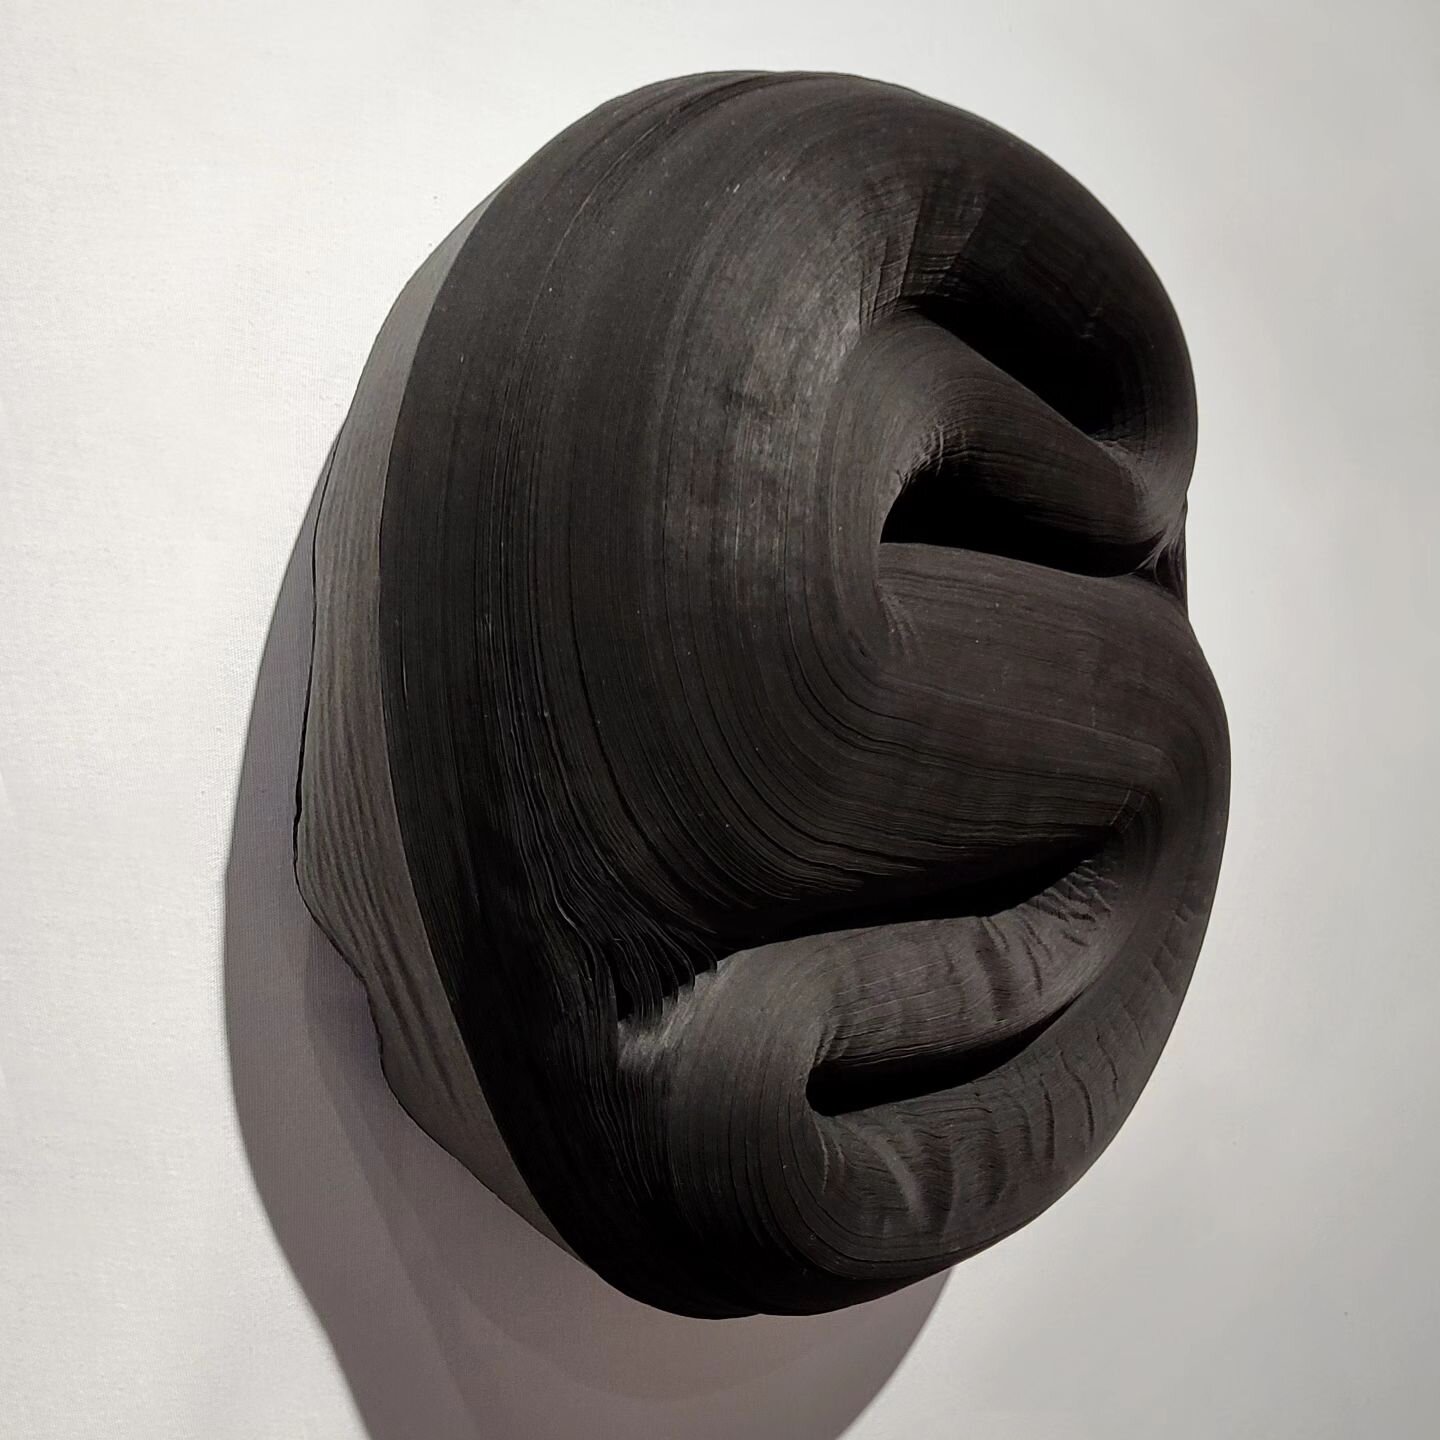 Shaped rolls of paper, which are made for cash registers and calculators, often rolled using a turntable, coloured with black Sumi ink.
Jae Ko, JK394, Size: 43 x 40 x 14 cm
Rolled paper with Sumi-ink

Jae Ko @jae_ko_
Seen @pan_amsterdam 
Gallery Roge